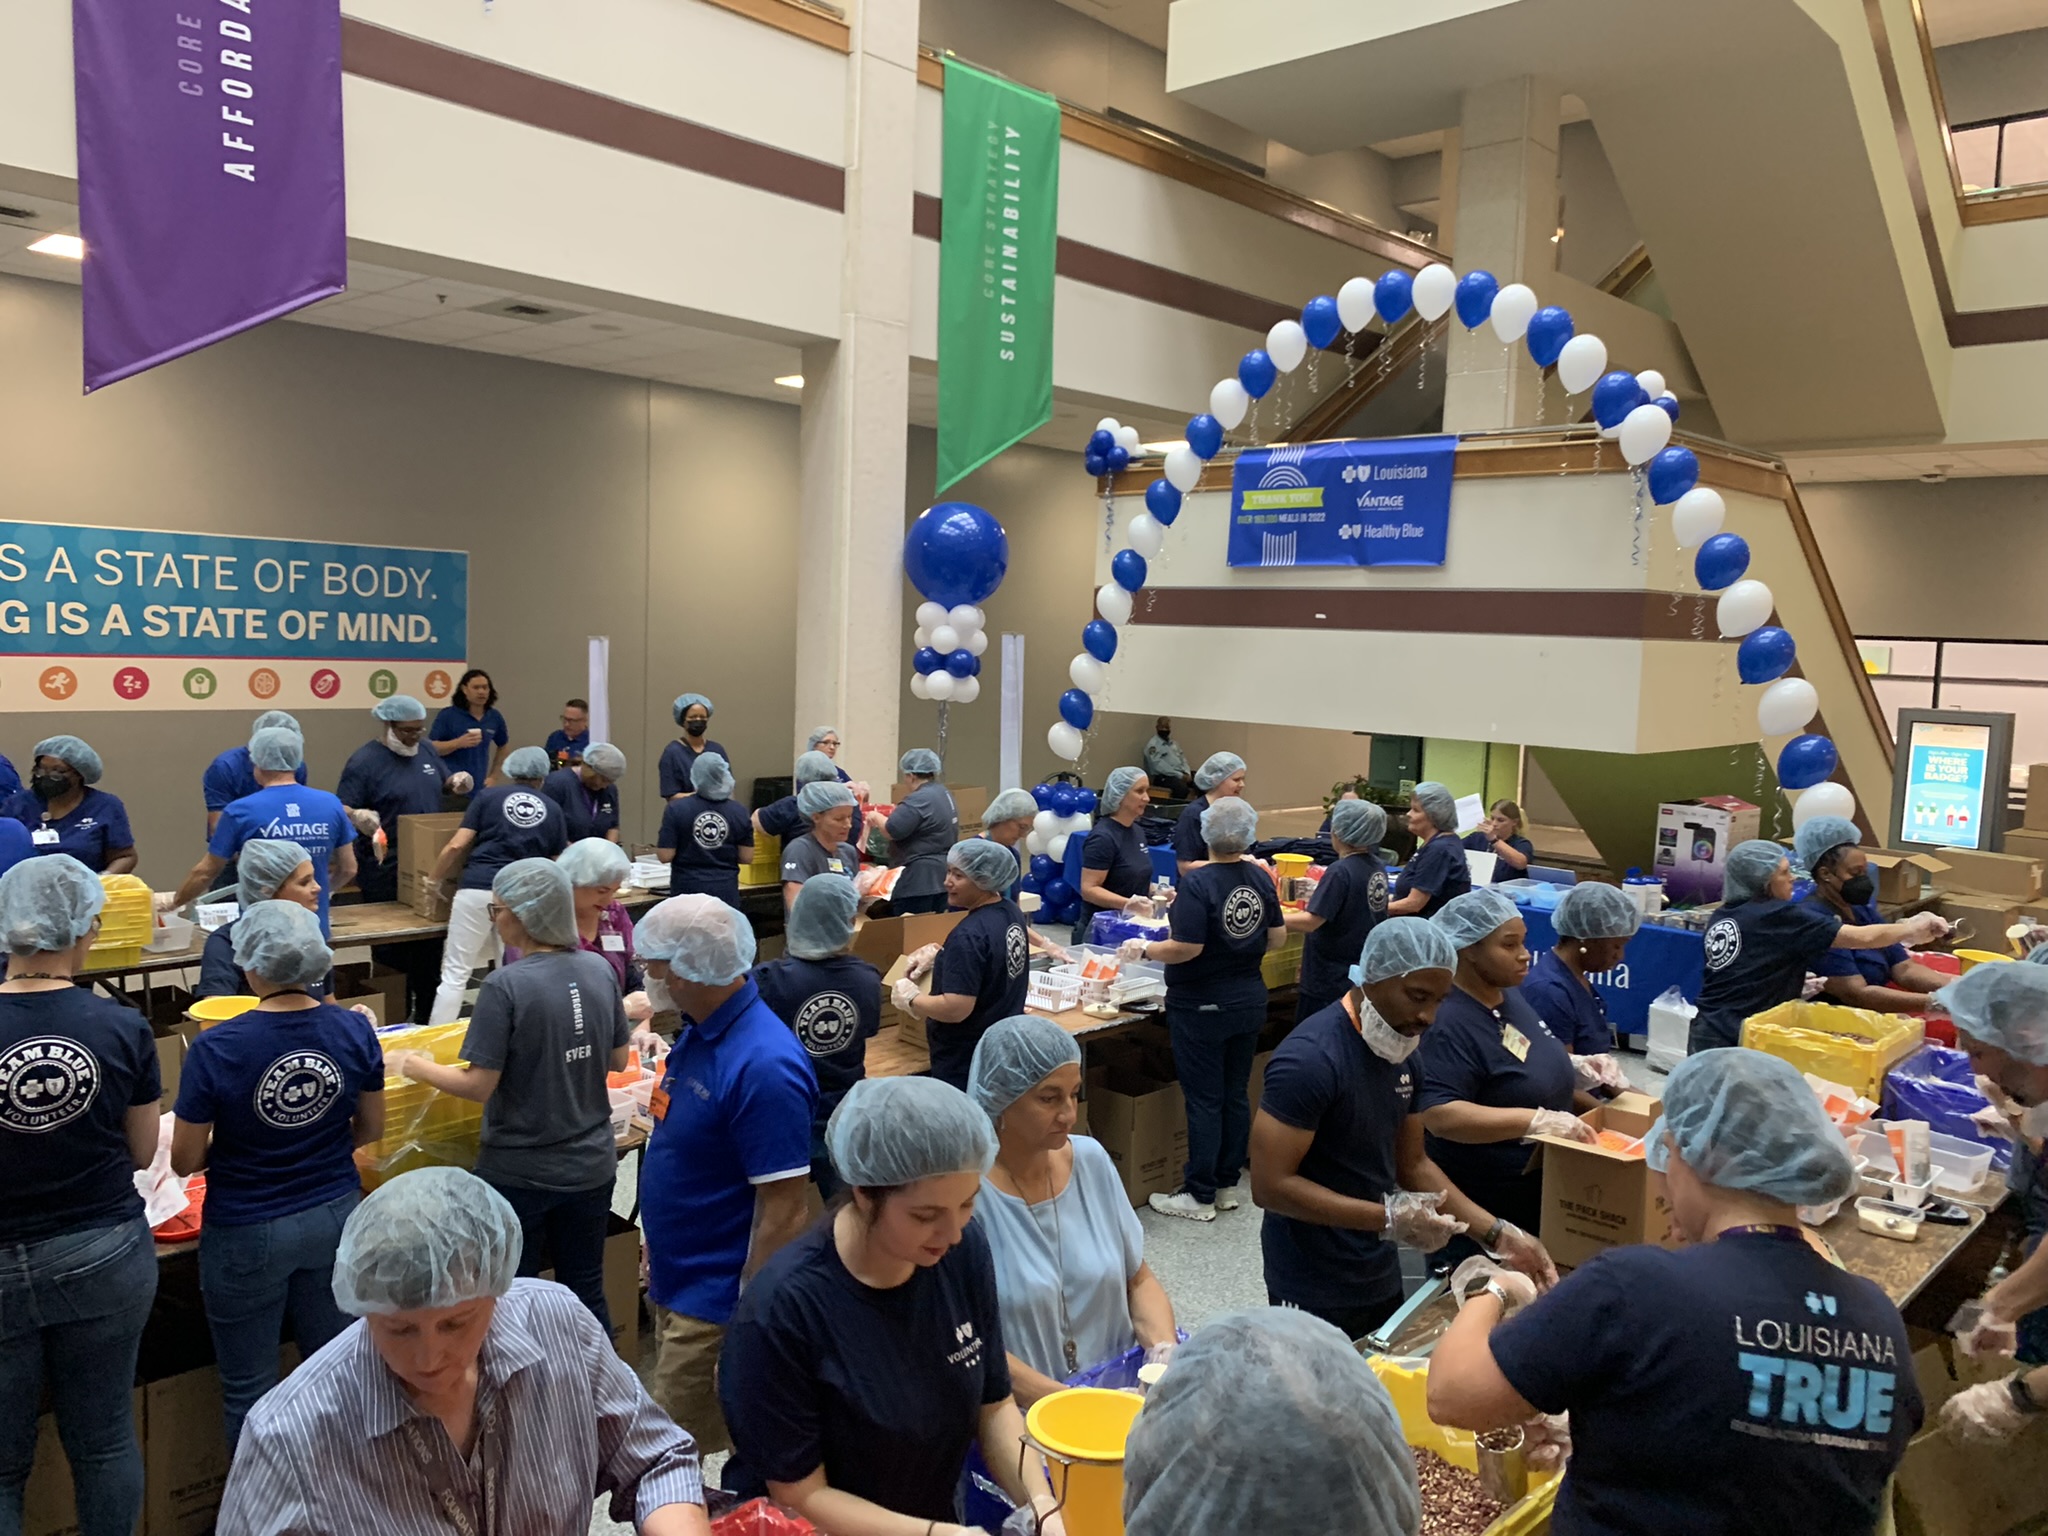 Employee-volunteers of Blue Cross and Blue Shield of gather to pack meals in the atrium of the company’s corporate headquarters in Baton Rouge. Last year, Blue Cross employee volunteered more than 55,000 hours, leading them to be named nationwide volunteer champions by Points of Light Foundation.